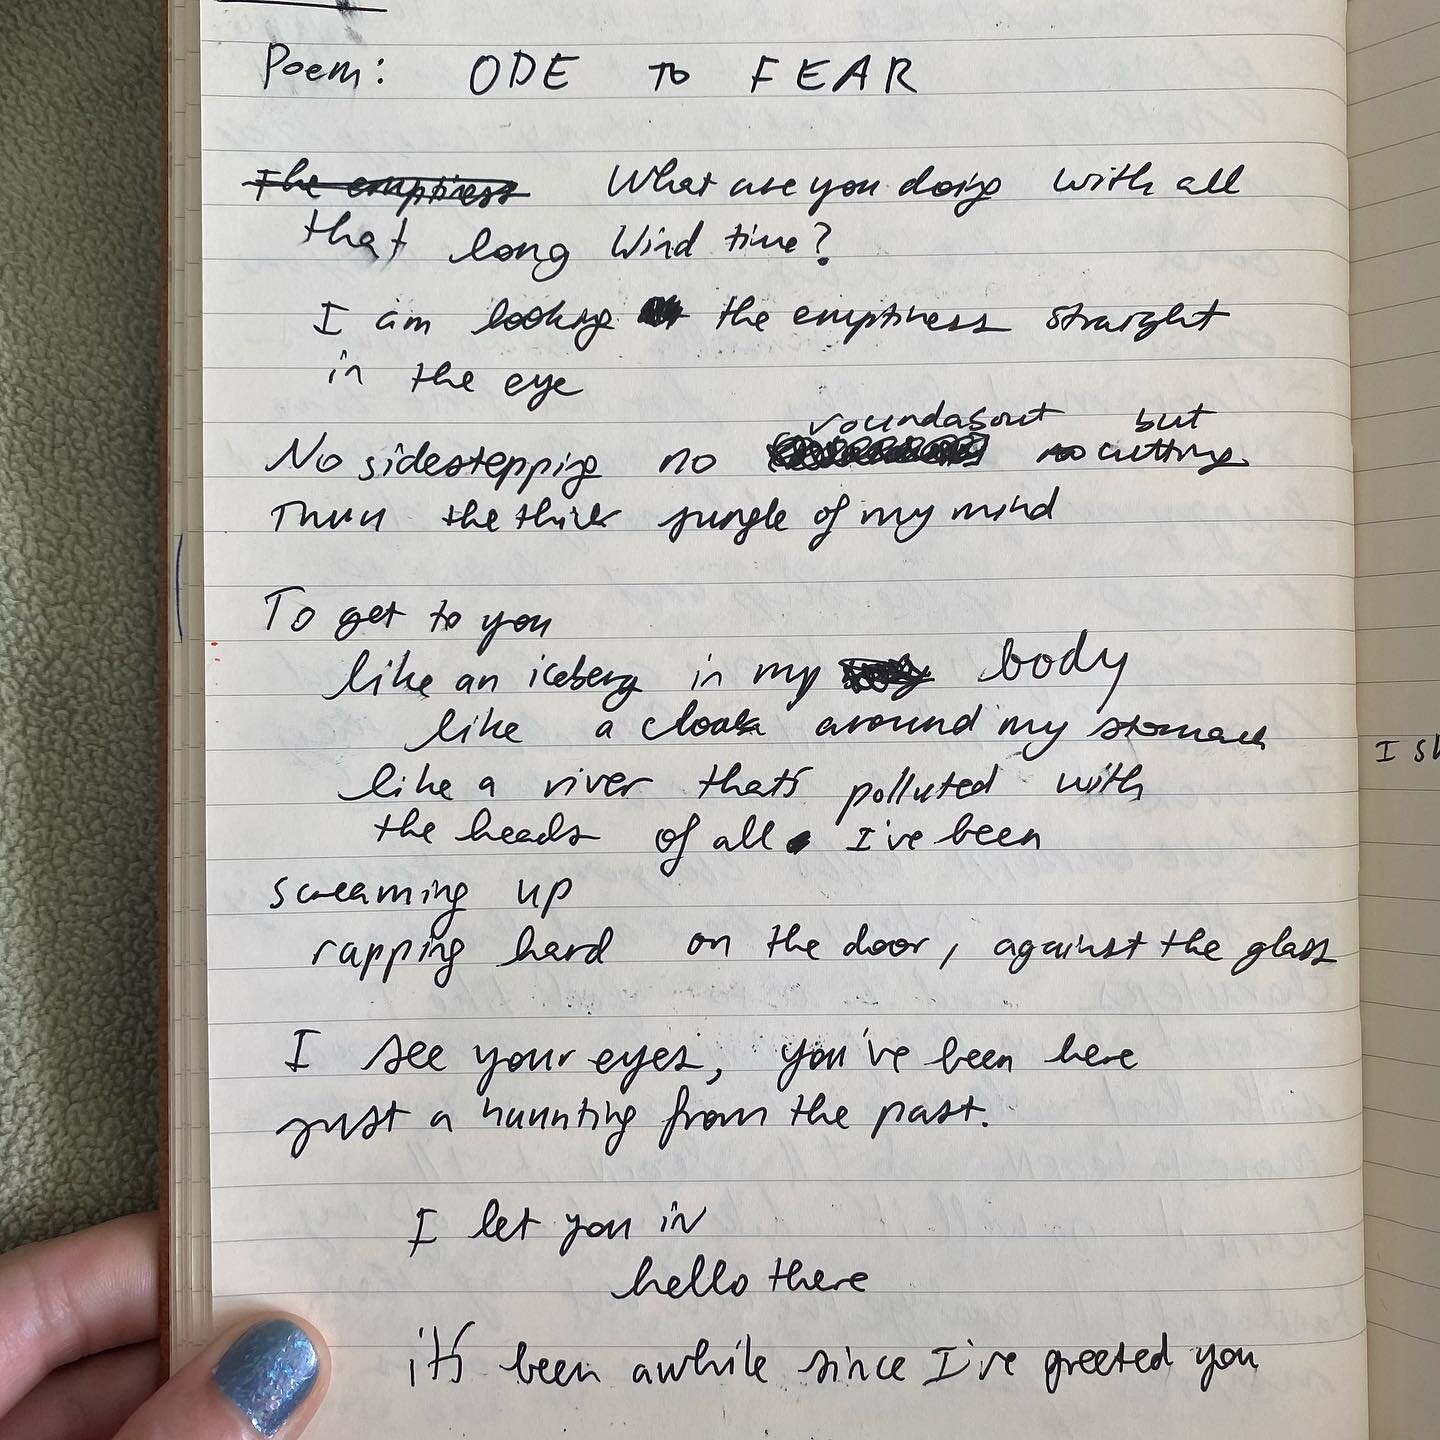 felt cute might delete later 🤭here is a poem called &ldquo;ode to fear&rdquo; ~ i have been toying with the idea of sharing my writing... and what the best way to do that would be? i thought it would be cool to share the pages straight from my journ